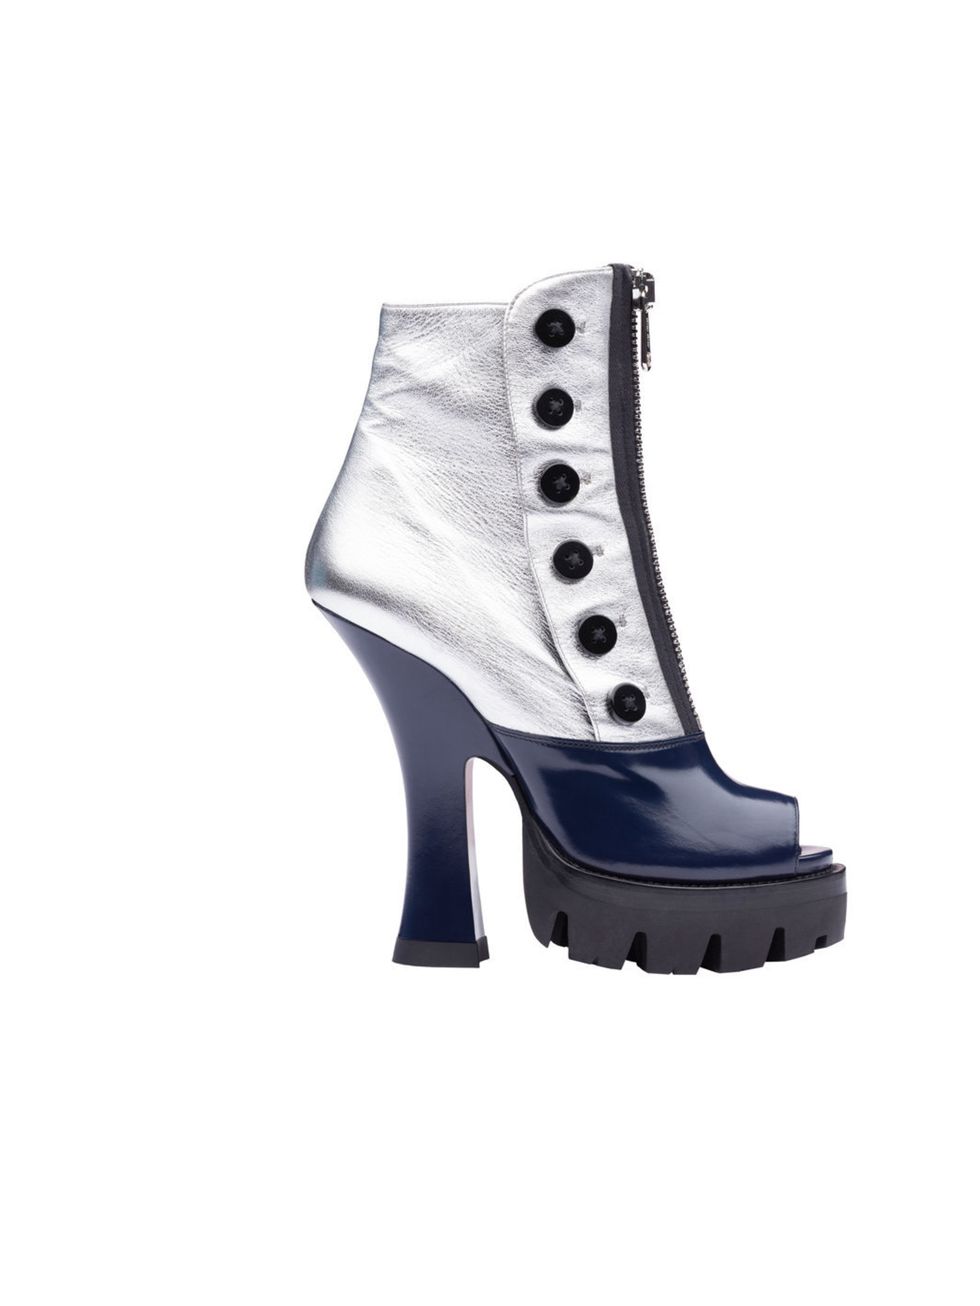 <p><a href="http://www.miumiu.com/en">Miu Miu</a>'s AW 13 boots are the way forward to rock this trend to the max, £645</p>